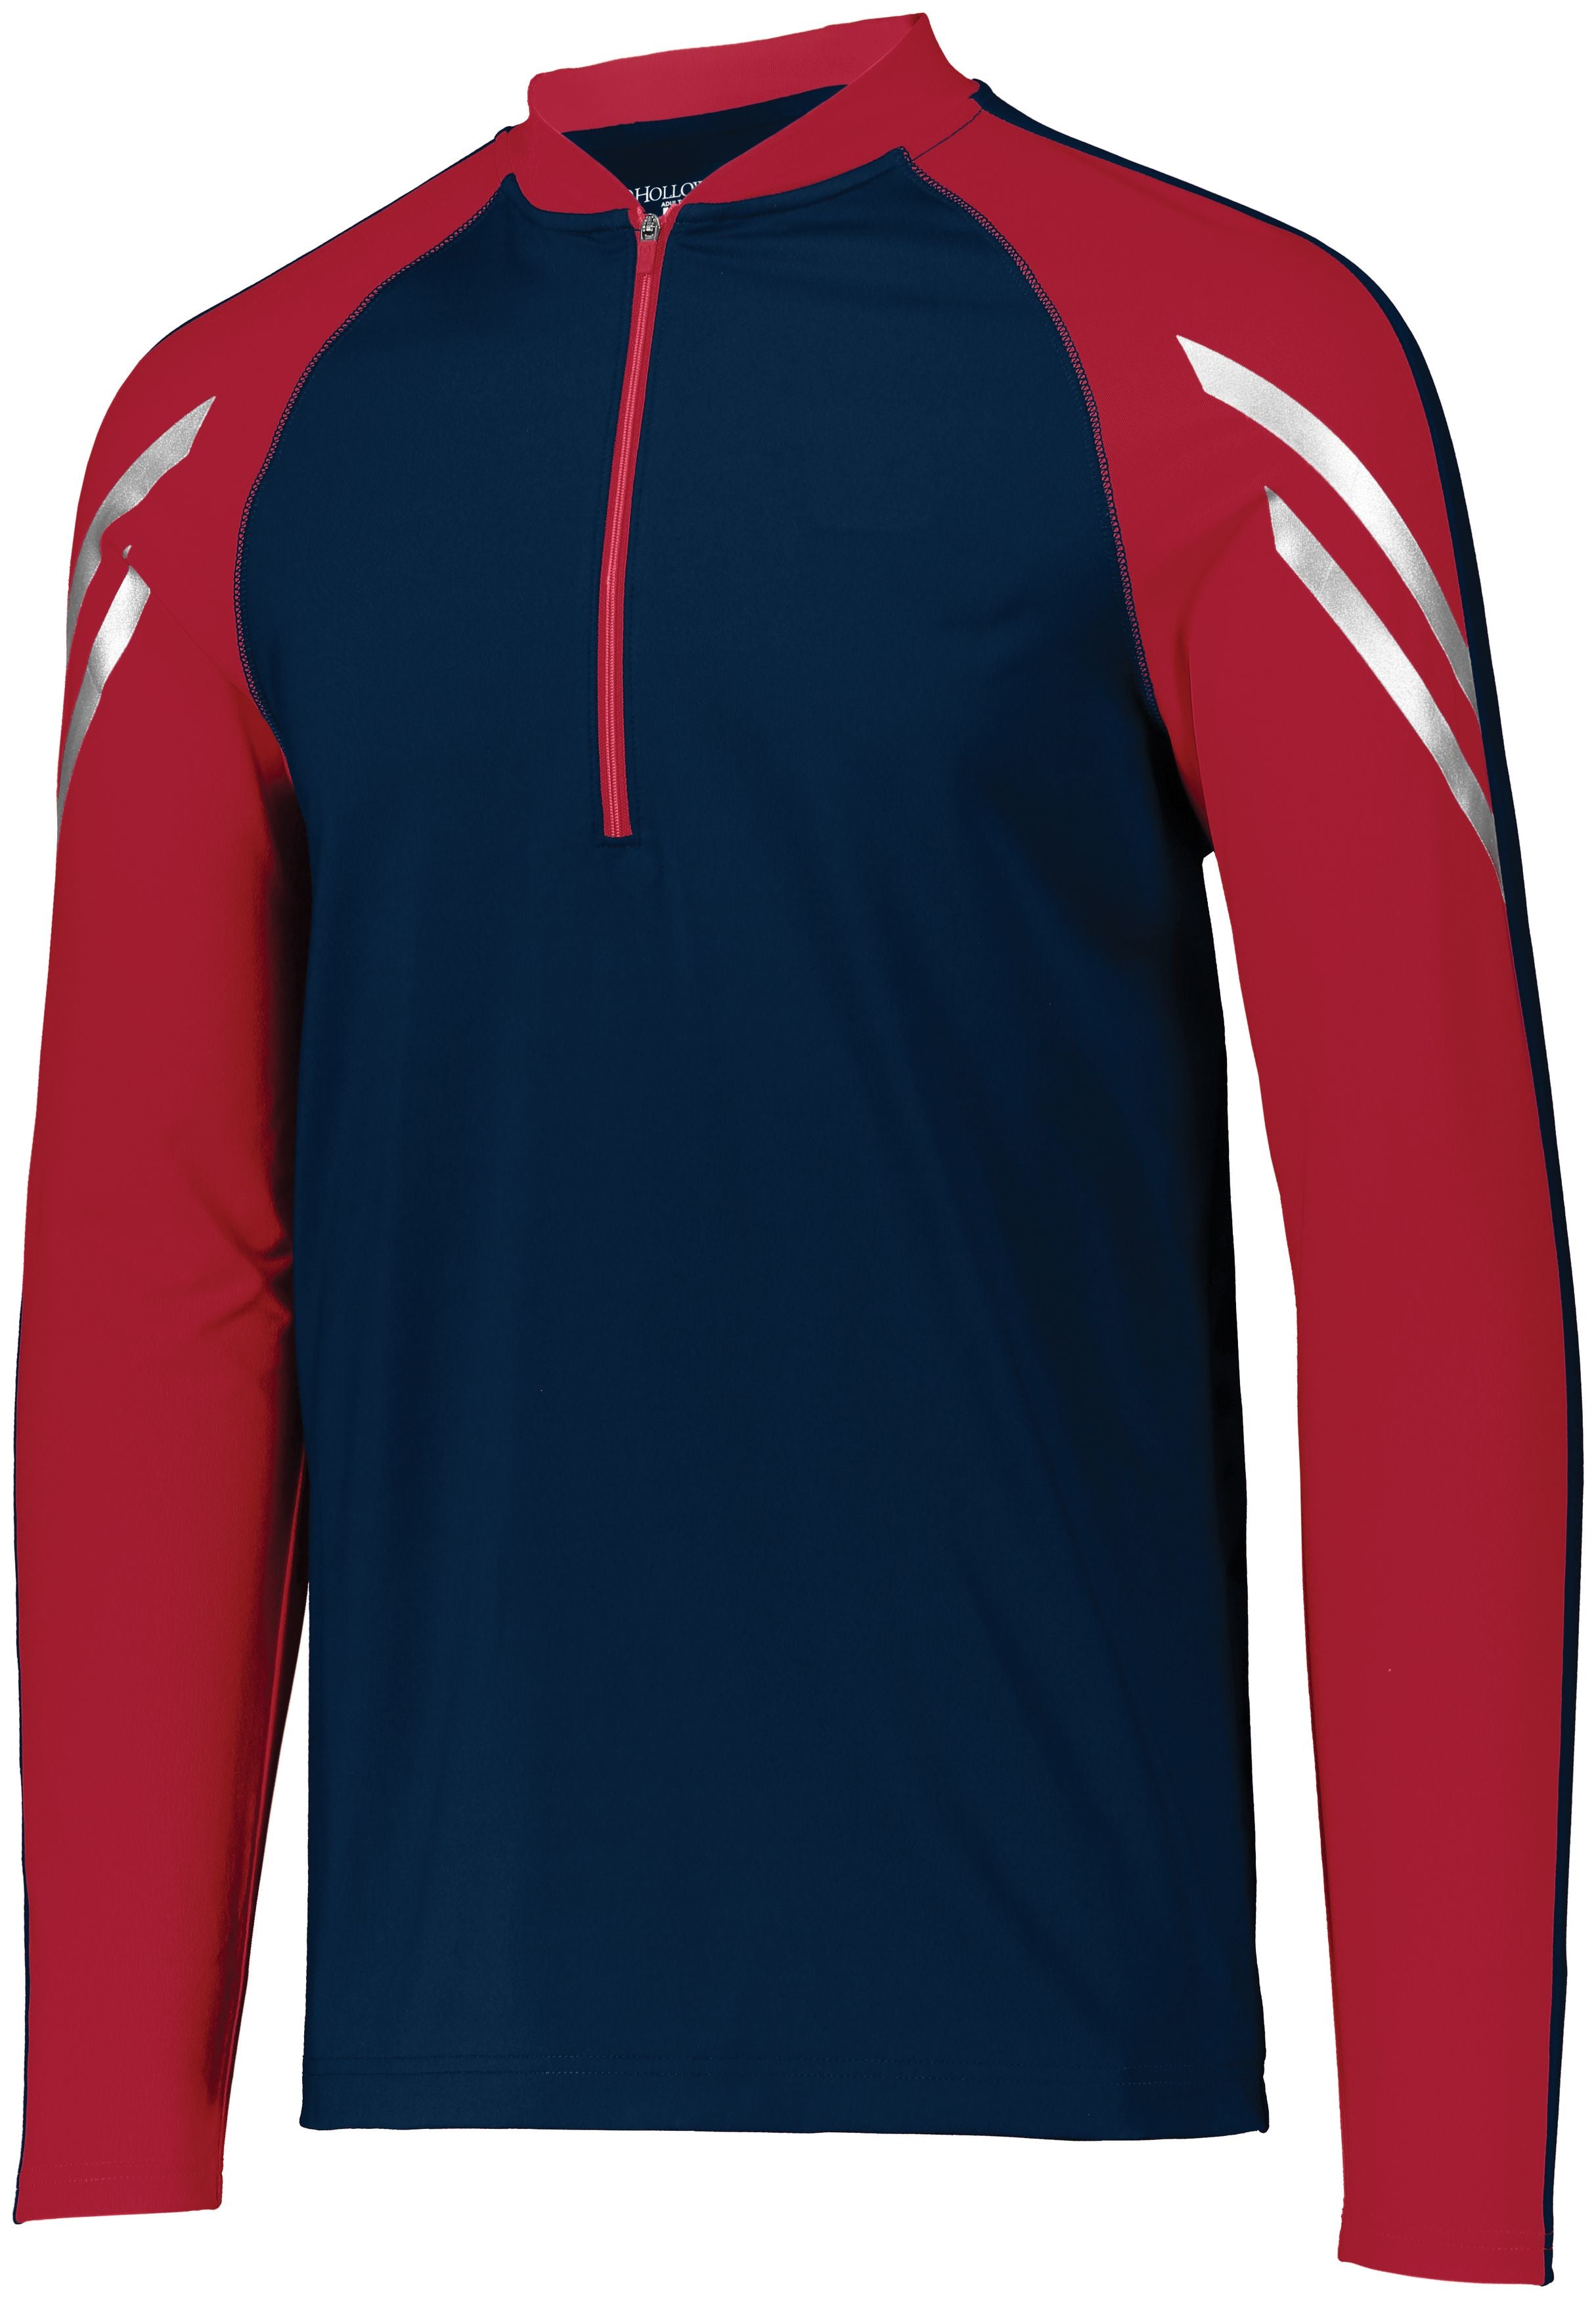 Holloway Flux 1/2 Zip Pullover in Navy/Scarlet  -Part of the Adult, Adult-Pullover, Holloway, Outerwear, Flux-Collection product lines at KanaleyCreations.com